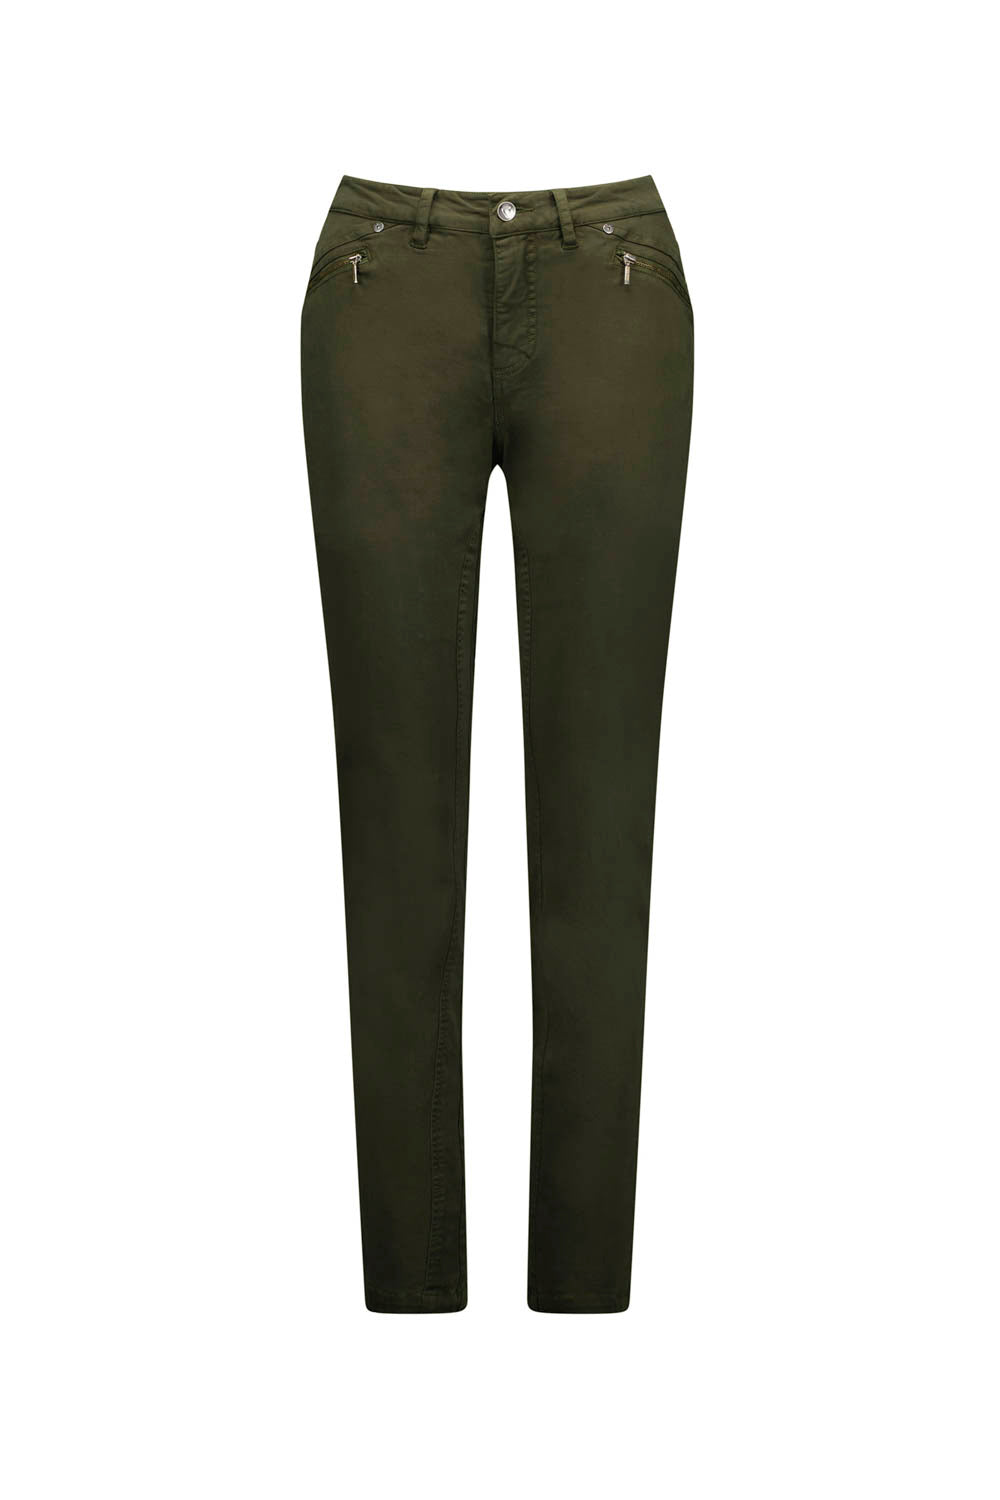 VERGE COHEN JEAN - OLIVE - THE VOGUE STORE